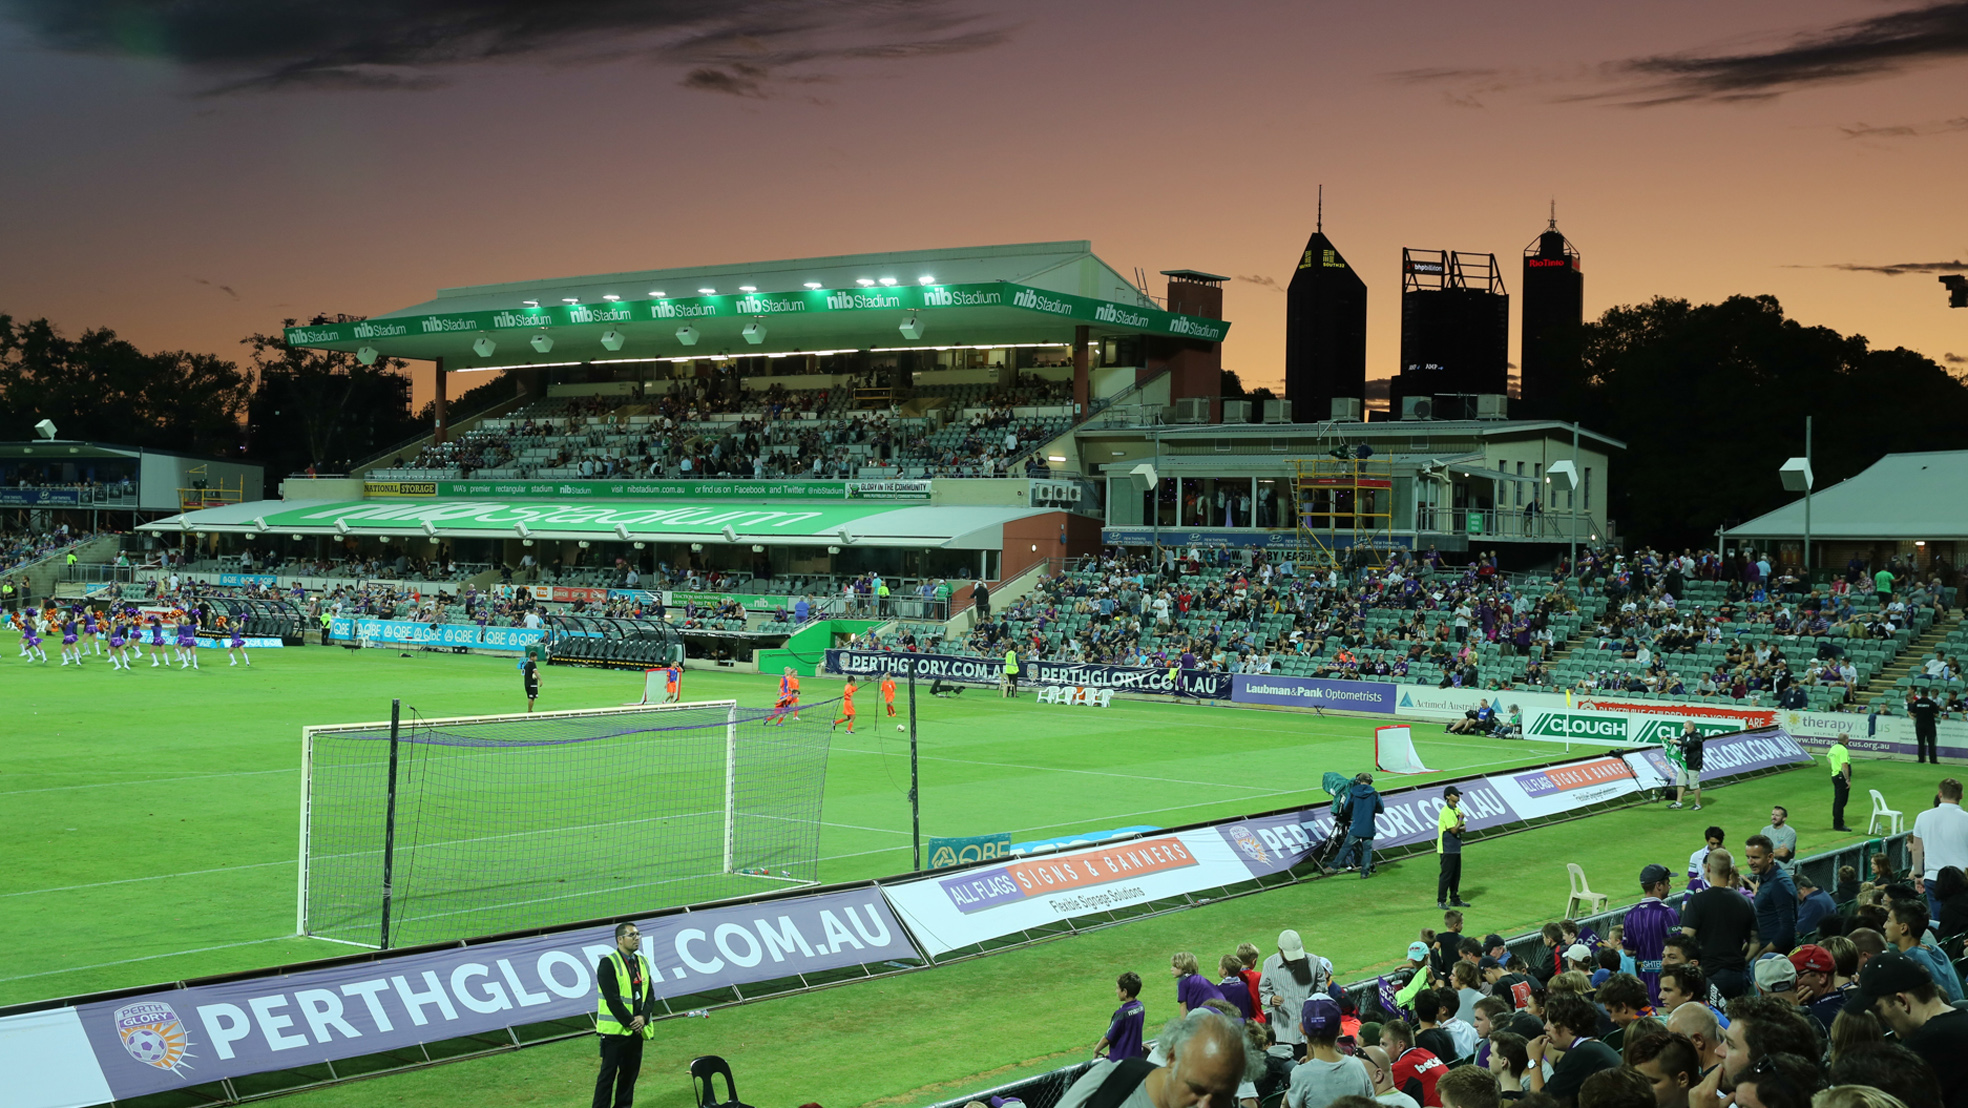 download perth glory ticket prices